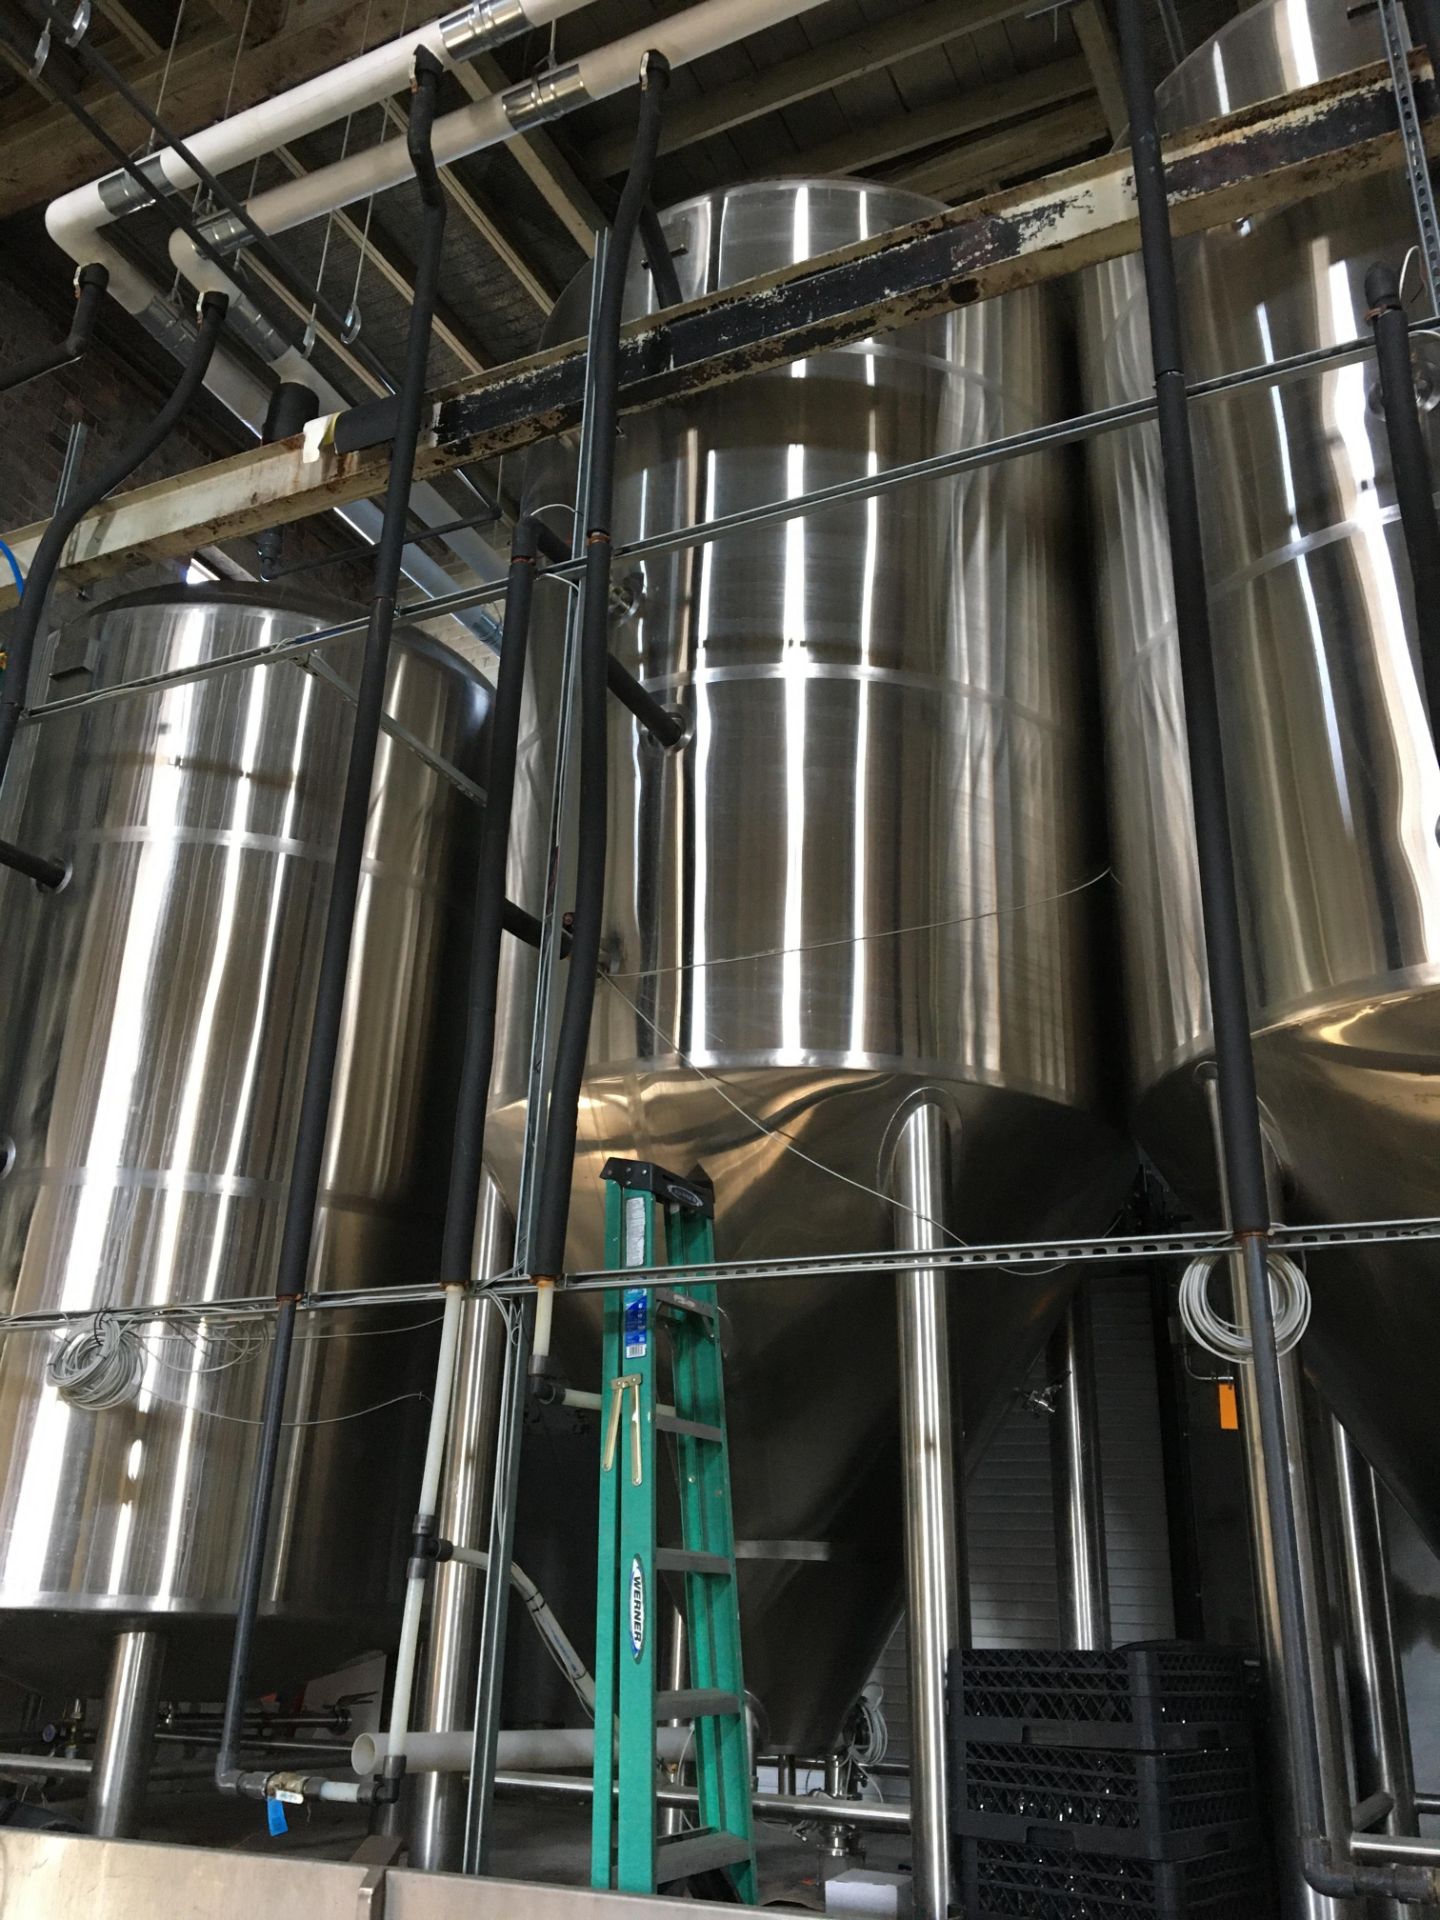 80-BBL Minnetonka Fermentation Tank, Model 80-BBL, Year 2017, Stainless Steel; Vessel store wort and - Image 2 of 14